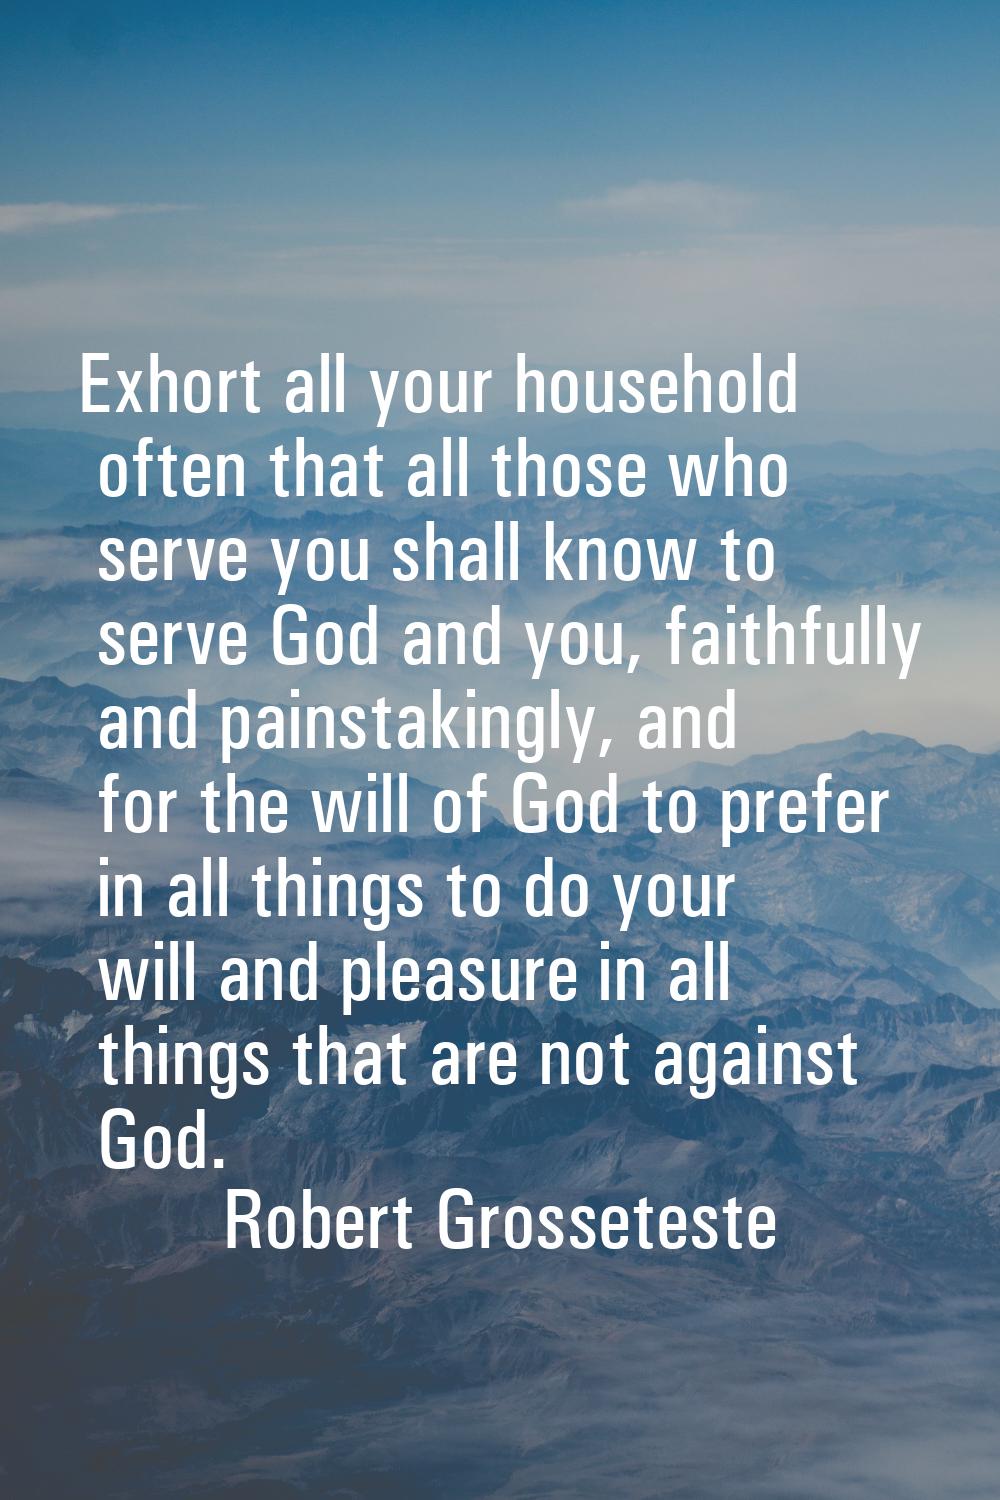 Exhort all your household often that all those who serve you shall know to serve God and you, faith